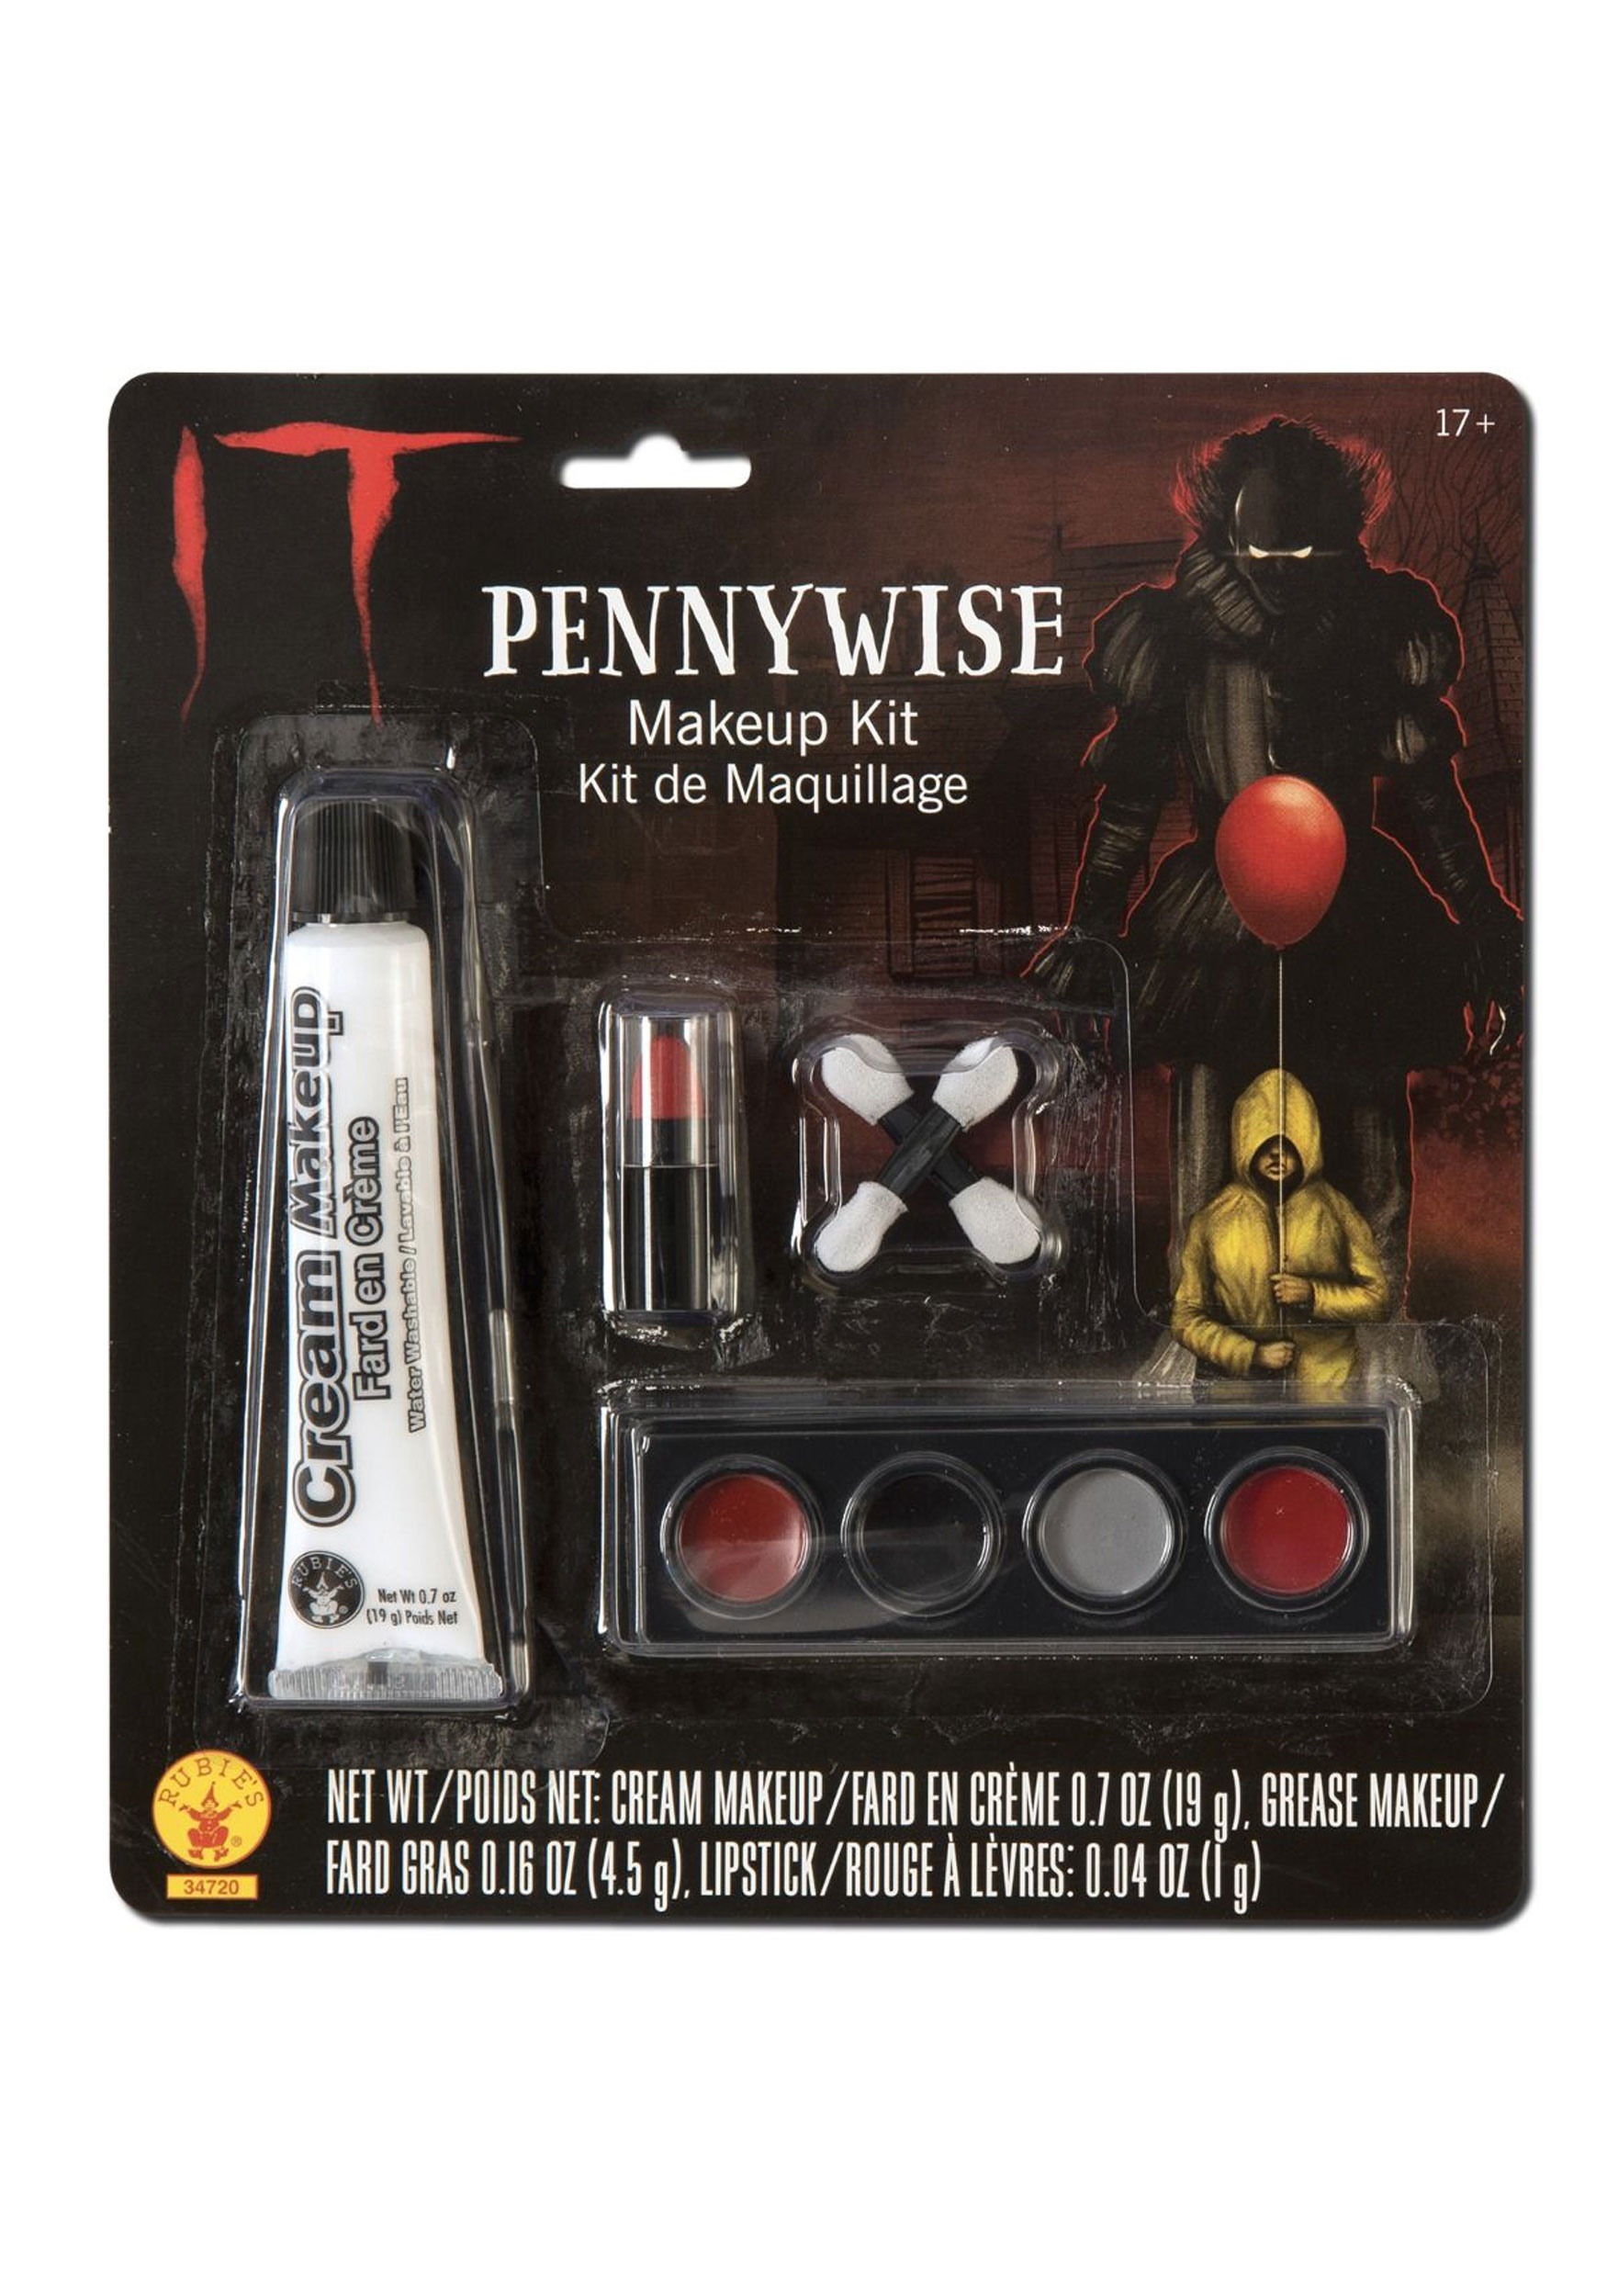 It: The Movie Pennywise Makeup Kit NUEVO Multicolor